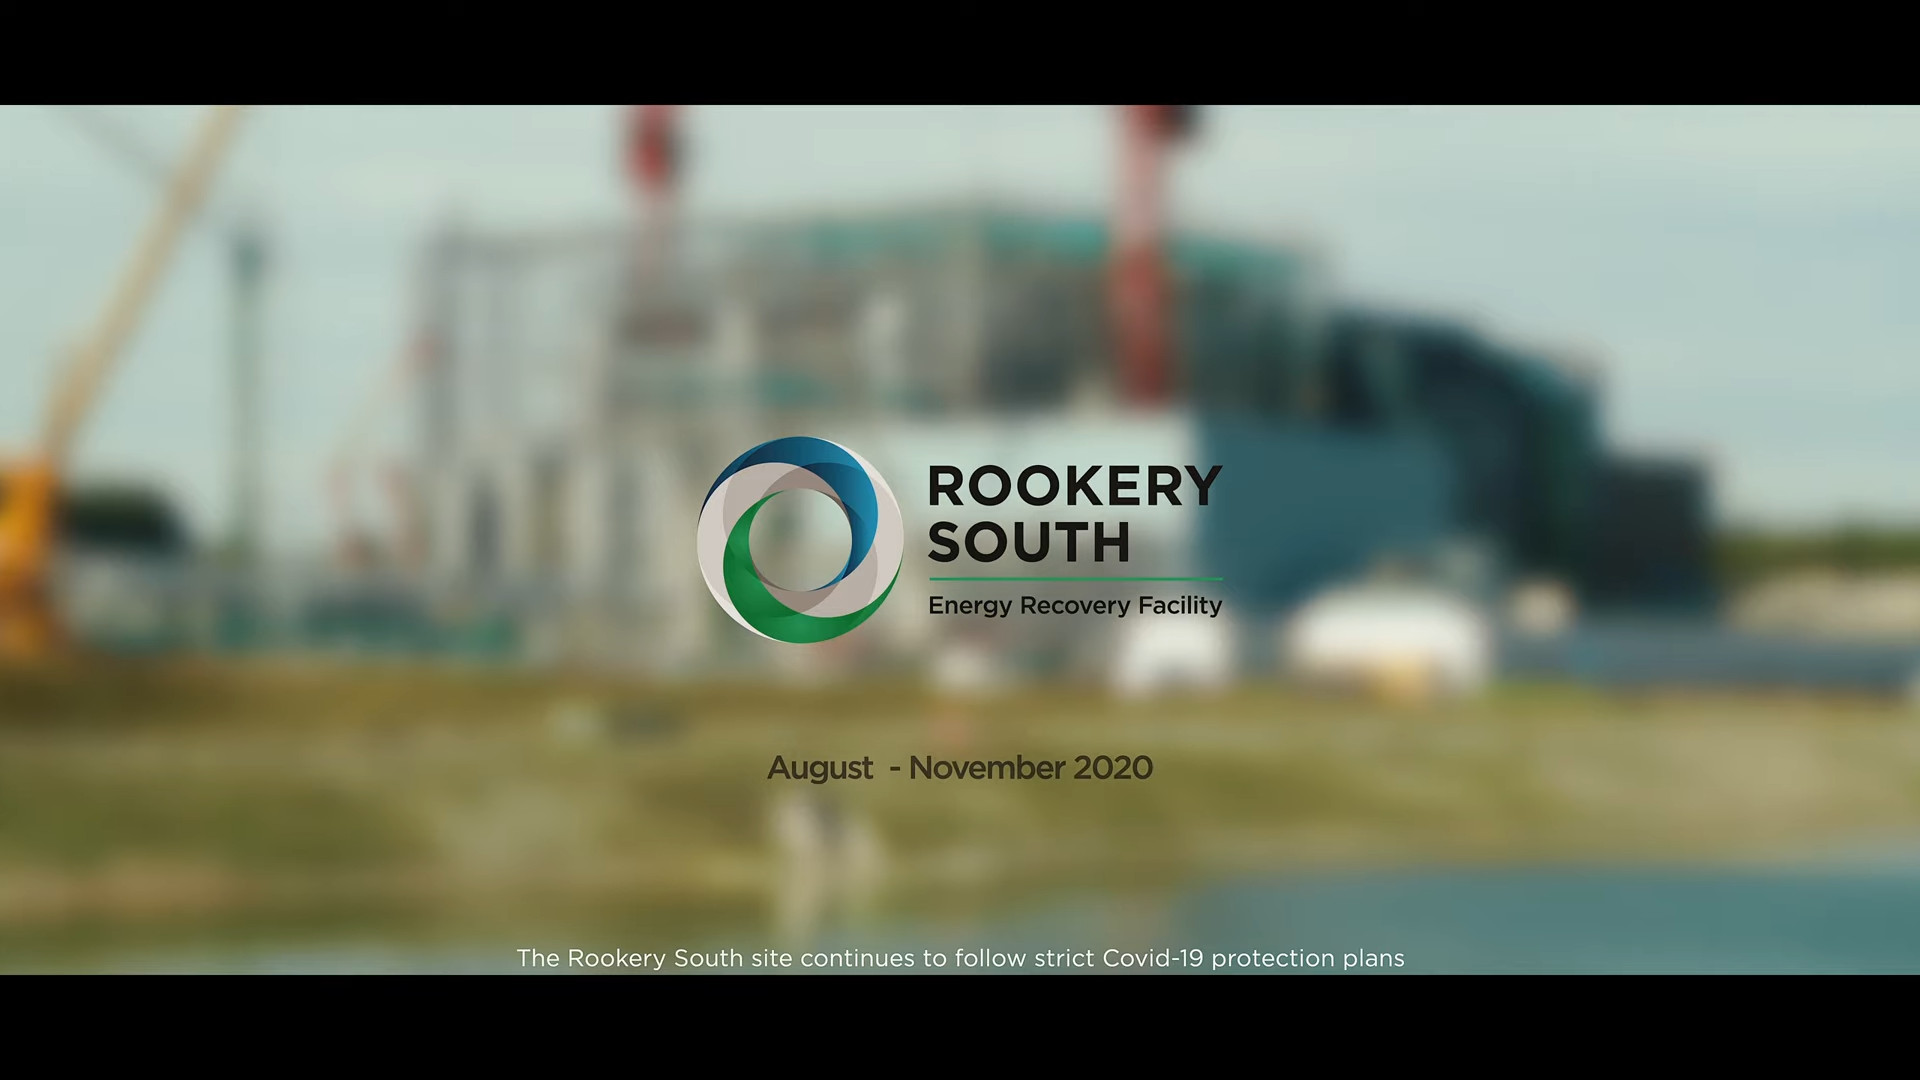 Rookery South Energy Recovery Facility in Bedford, England